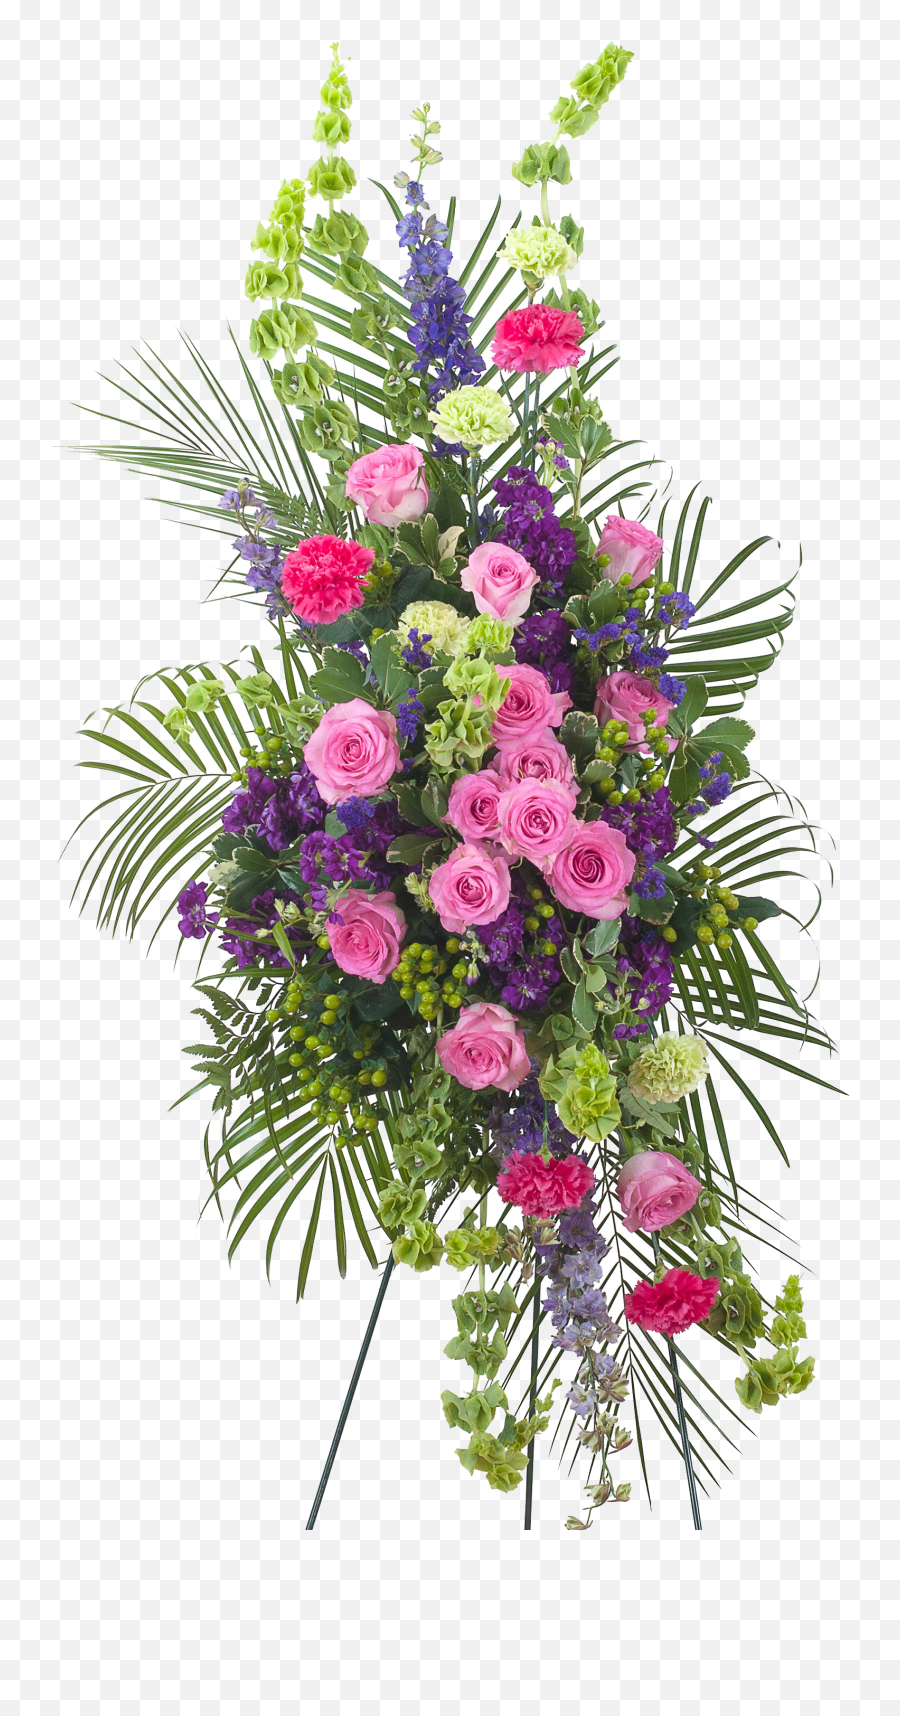 Funeral Flowers Png Picture - Funeral Wtreath Clipart,Funeral Flowers Png